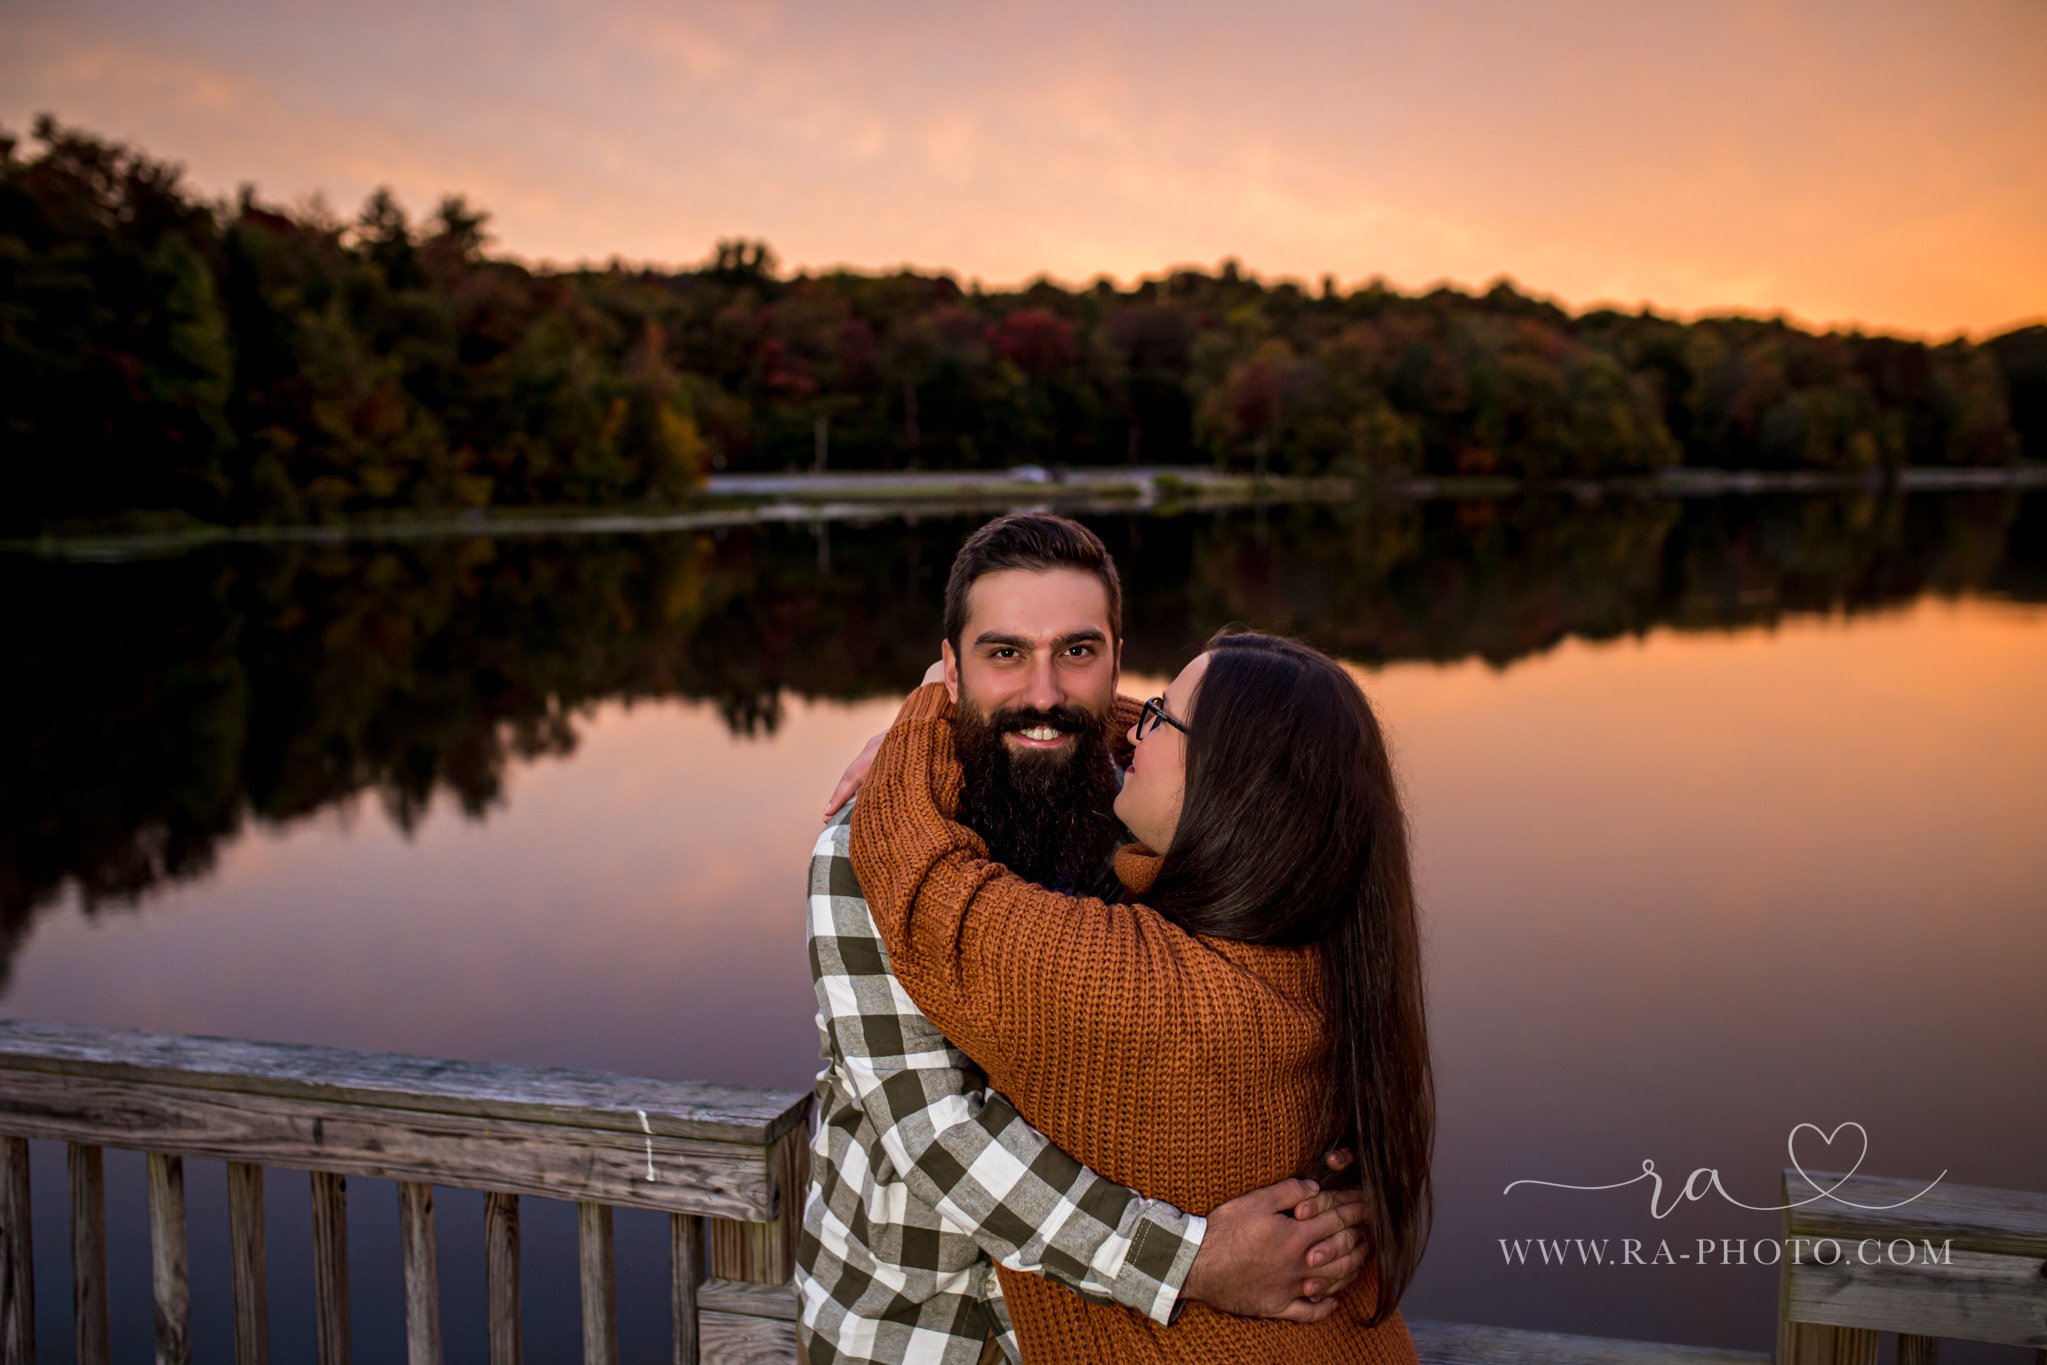 047-MGS-FALLS-CREEK-PA-ENGAGEMENT-PICTURES.jpg